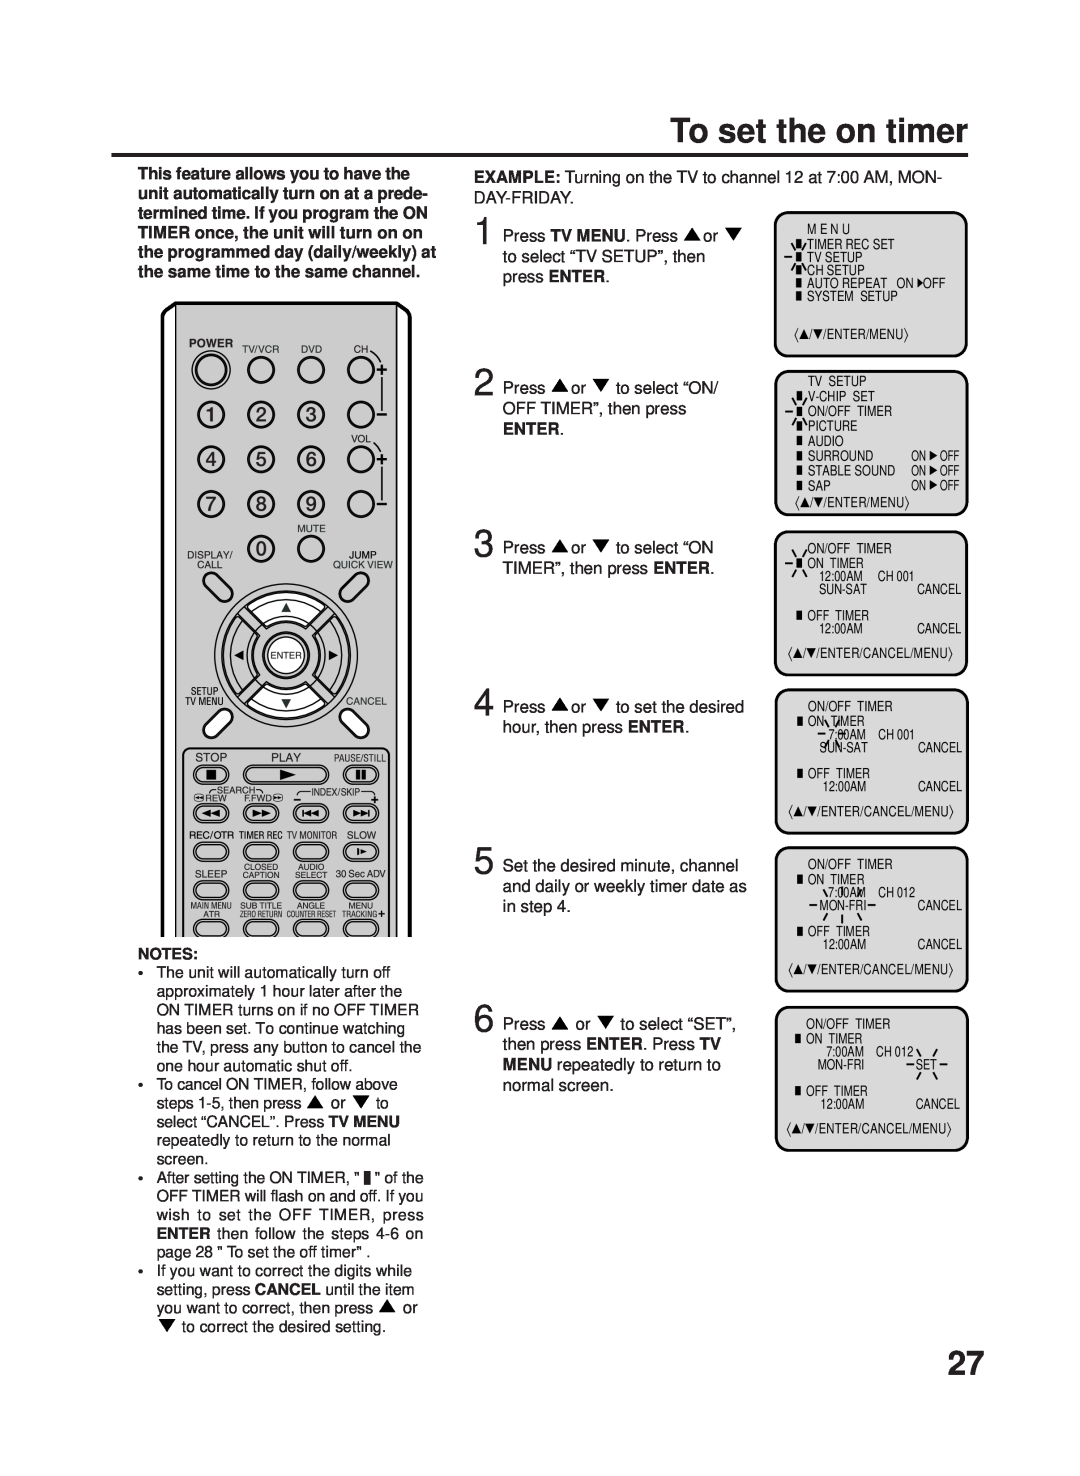 RCA 27F500TDV manual To set the on timer, EXAMPLE Turning on the TV to channel 12 at 700 AM, MON DAY-FRIDAY, Enter 